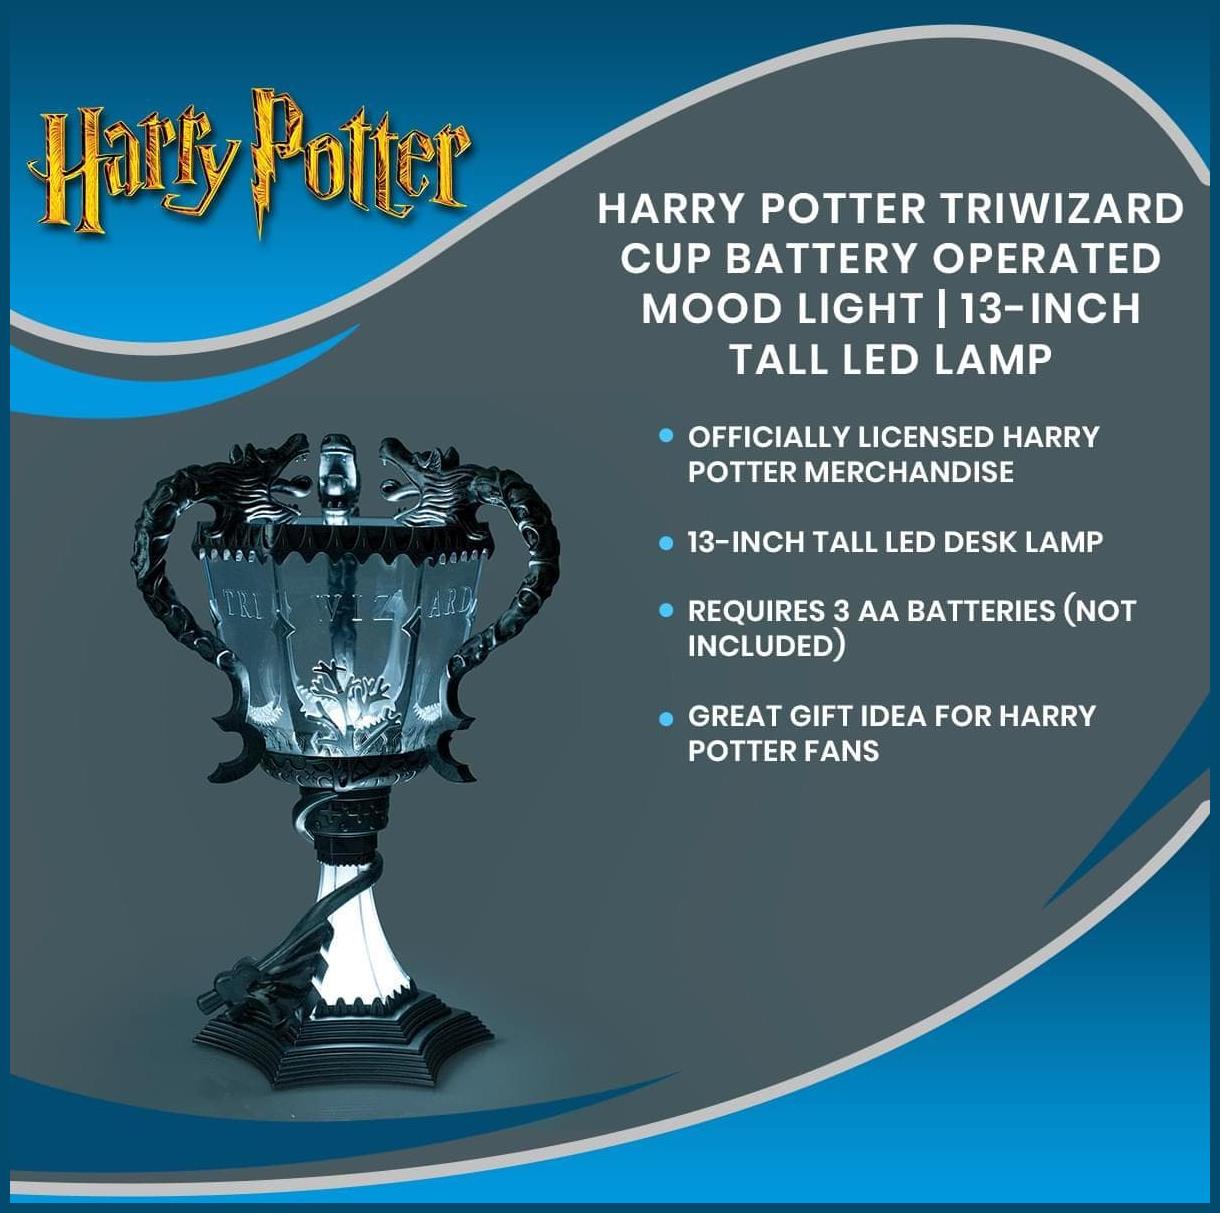 Harry Potter Triwizard Cup Battery Operated Mood Light | 13-Inch Tall LED - PartyBell.com